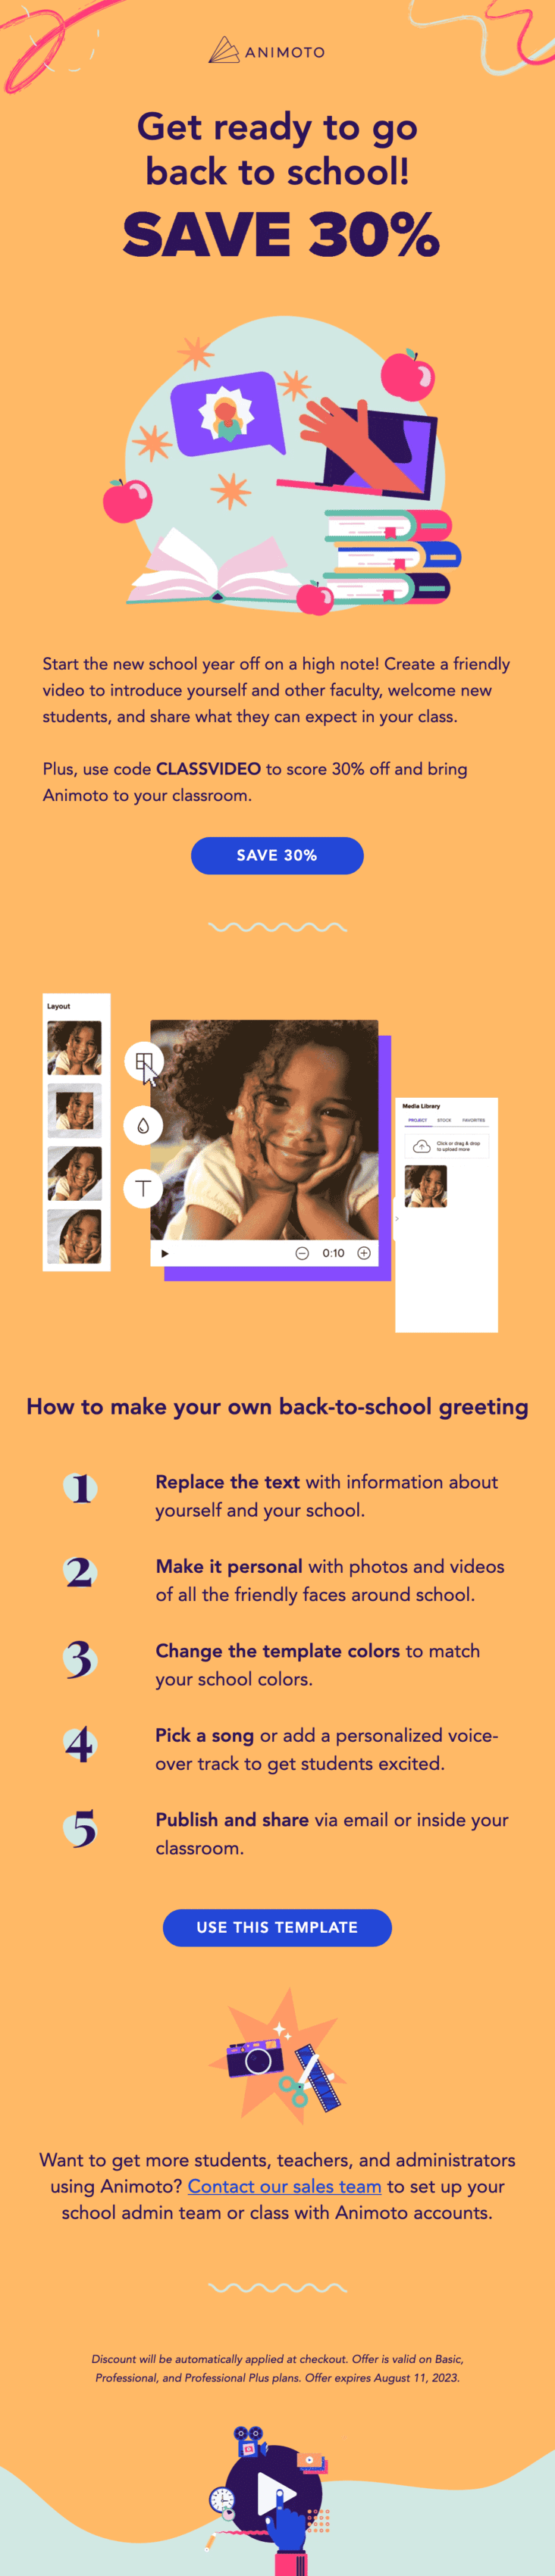 Back-to-school email with instructions on how to create a greeting video for students